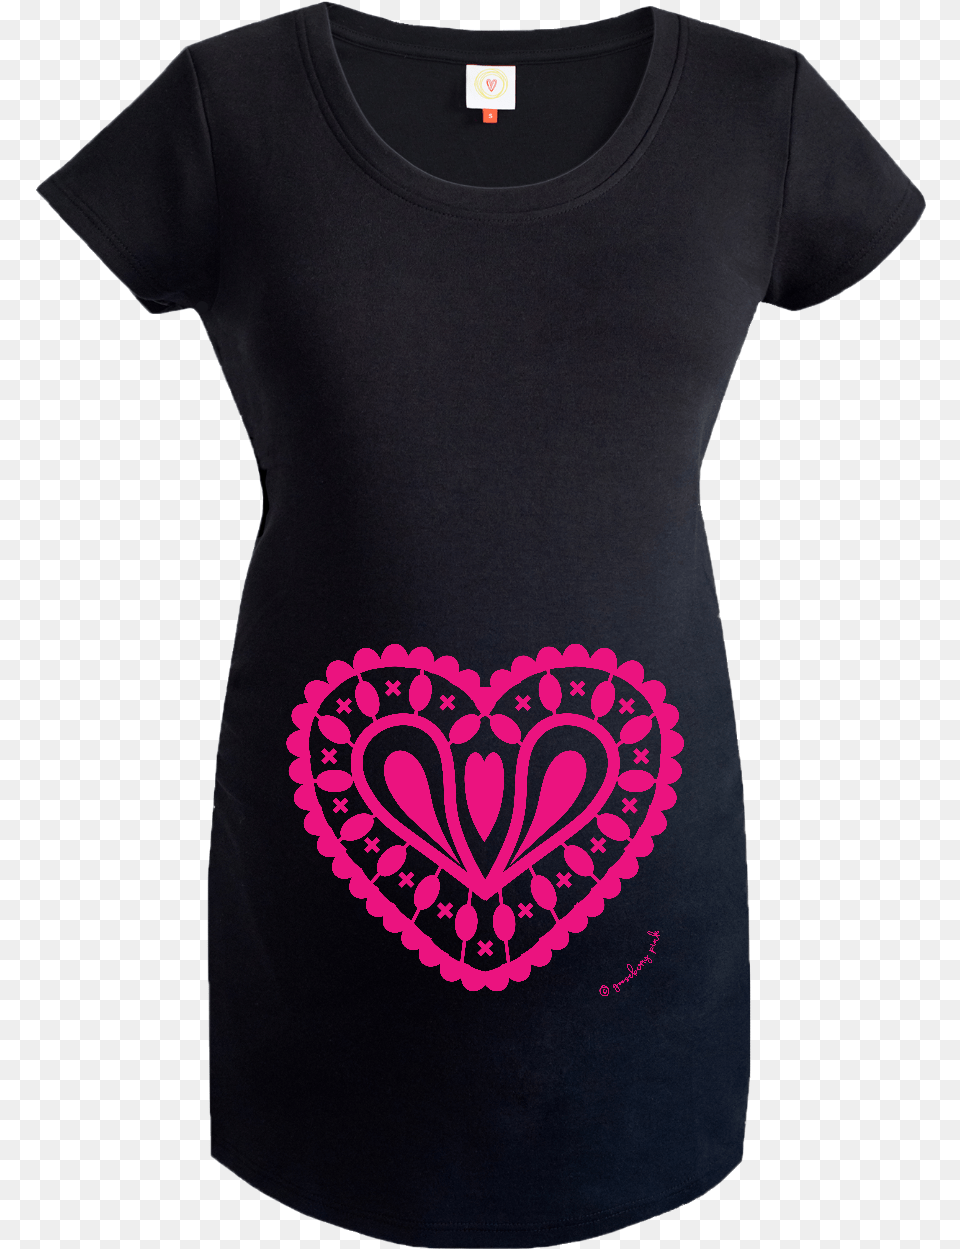 Hd Gooseberry Pink Hot Heart Maternity Top In Transparent Background, Clothing, T-shirt, Shirt, Pattern Free Png Download